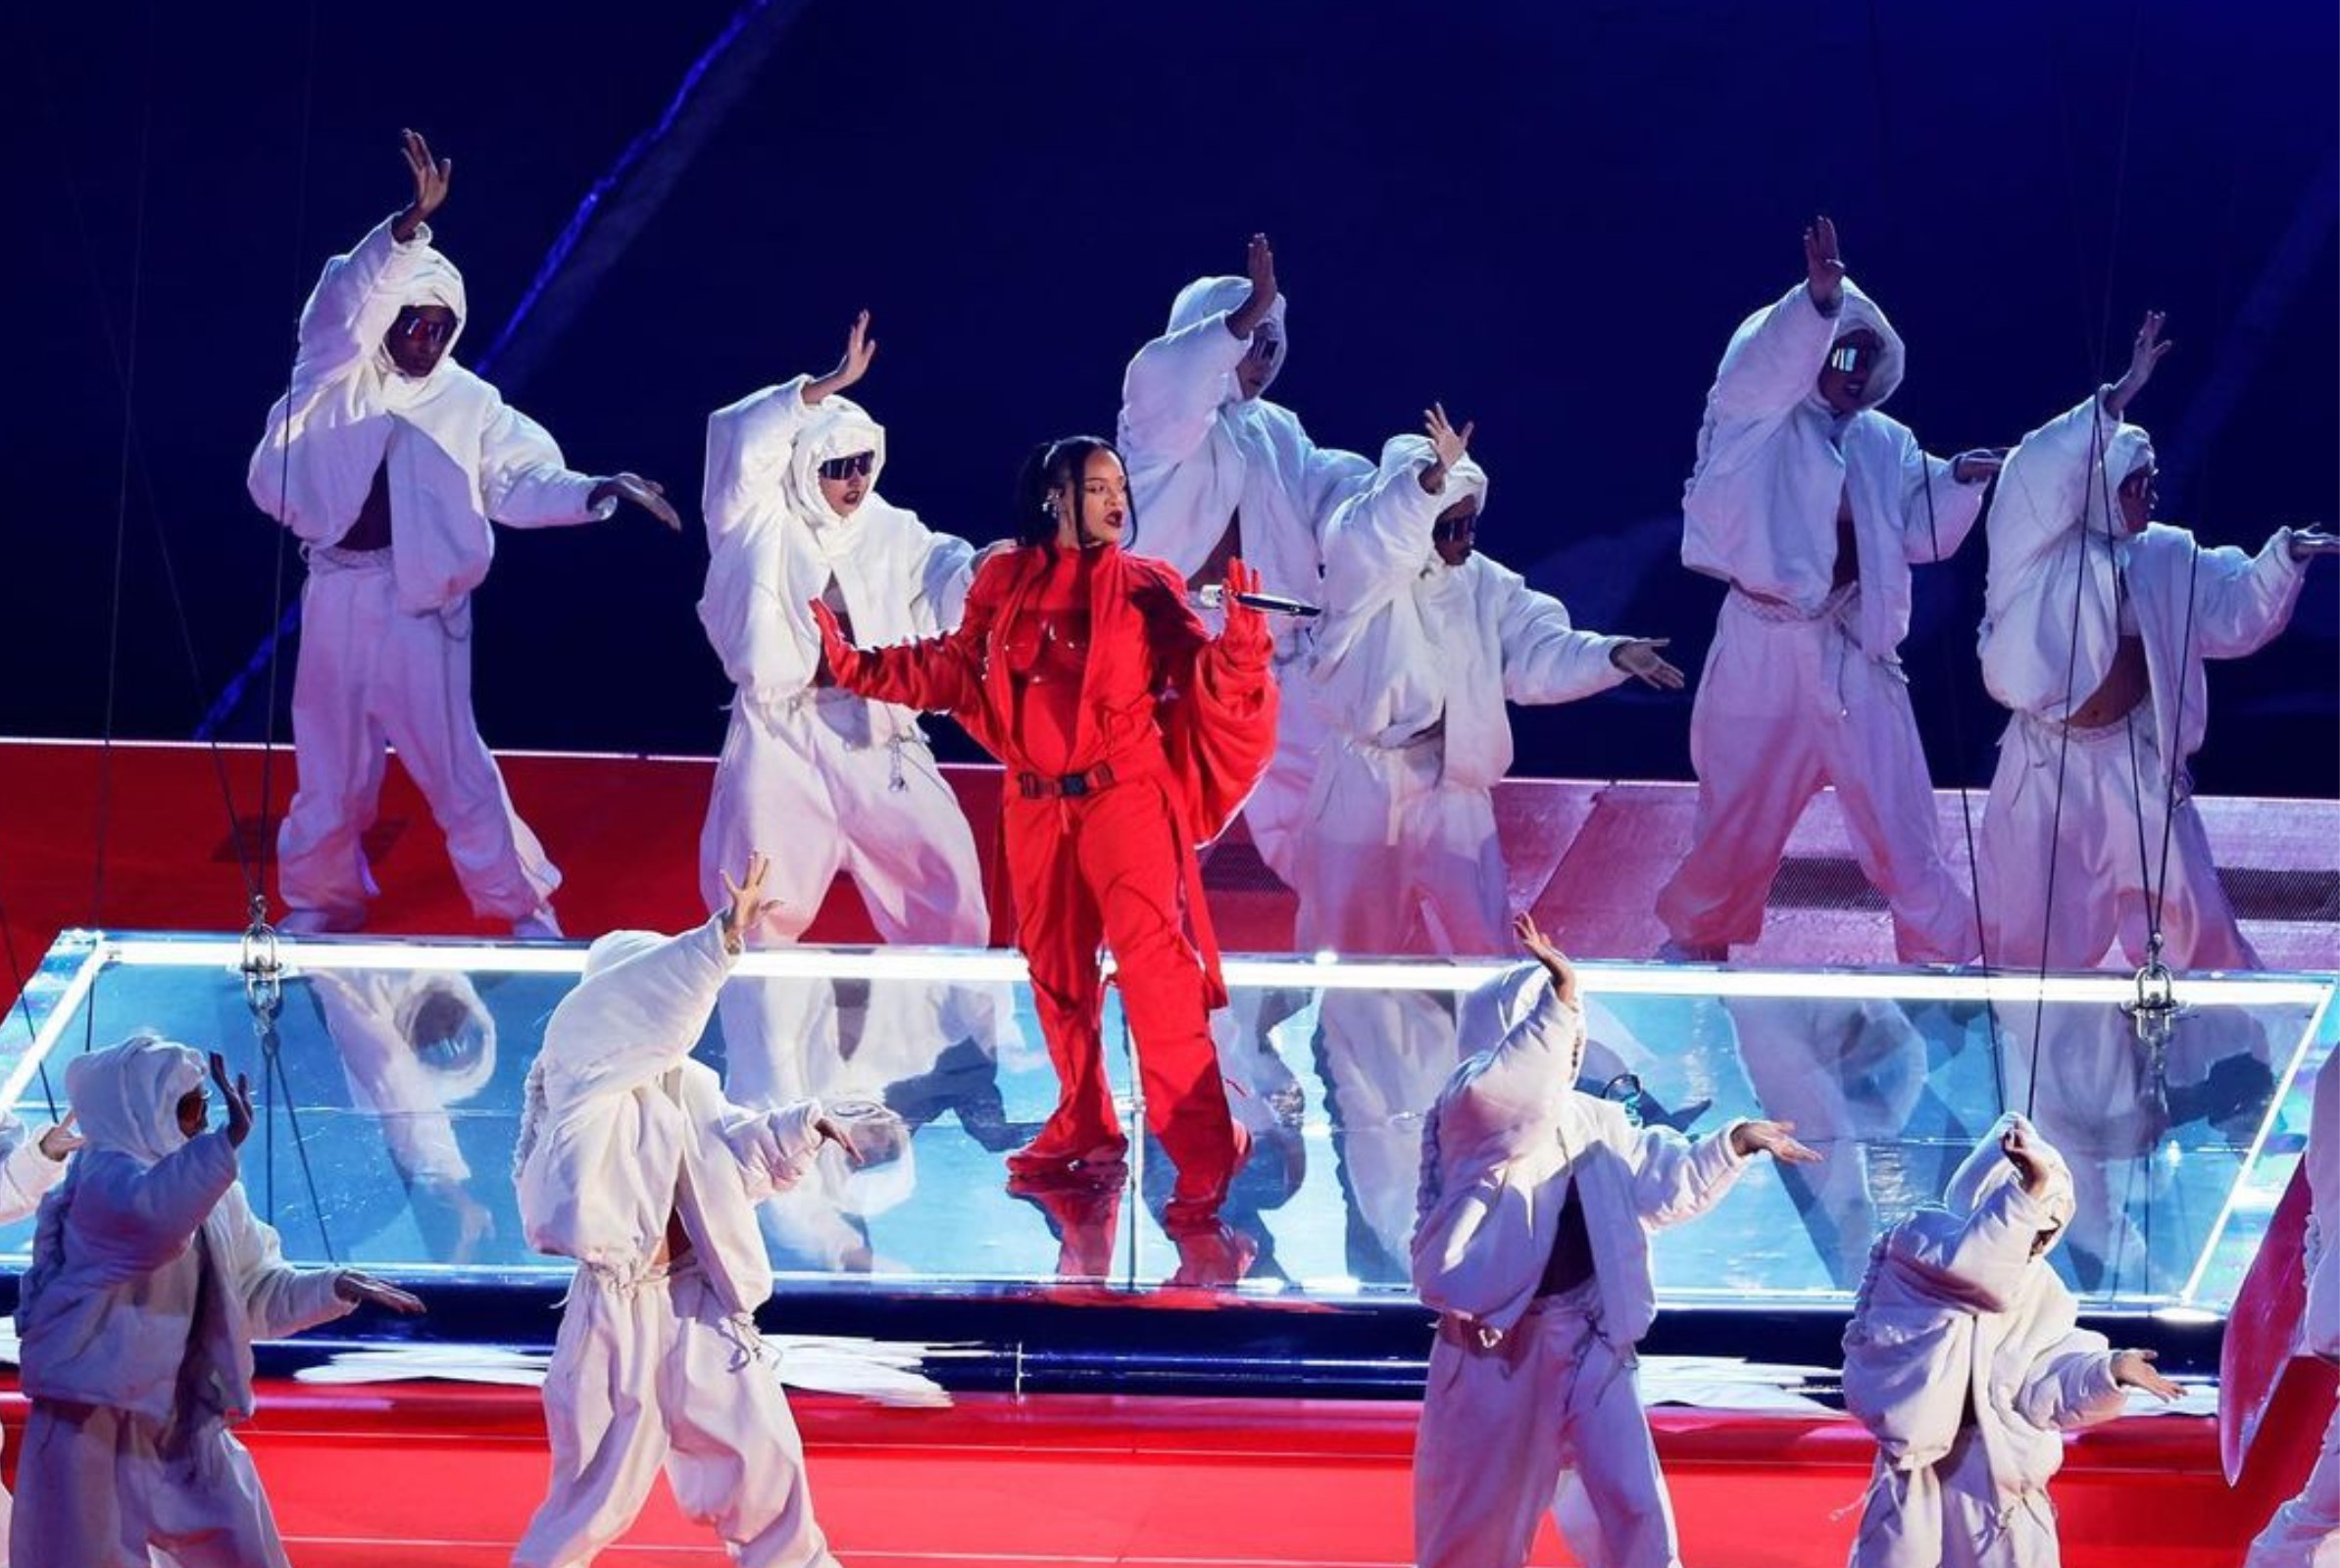 Highlights From Rihanna's Blazing Performance at the Super Bowl ...